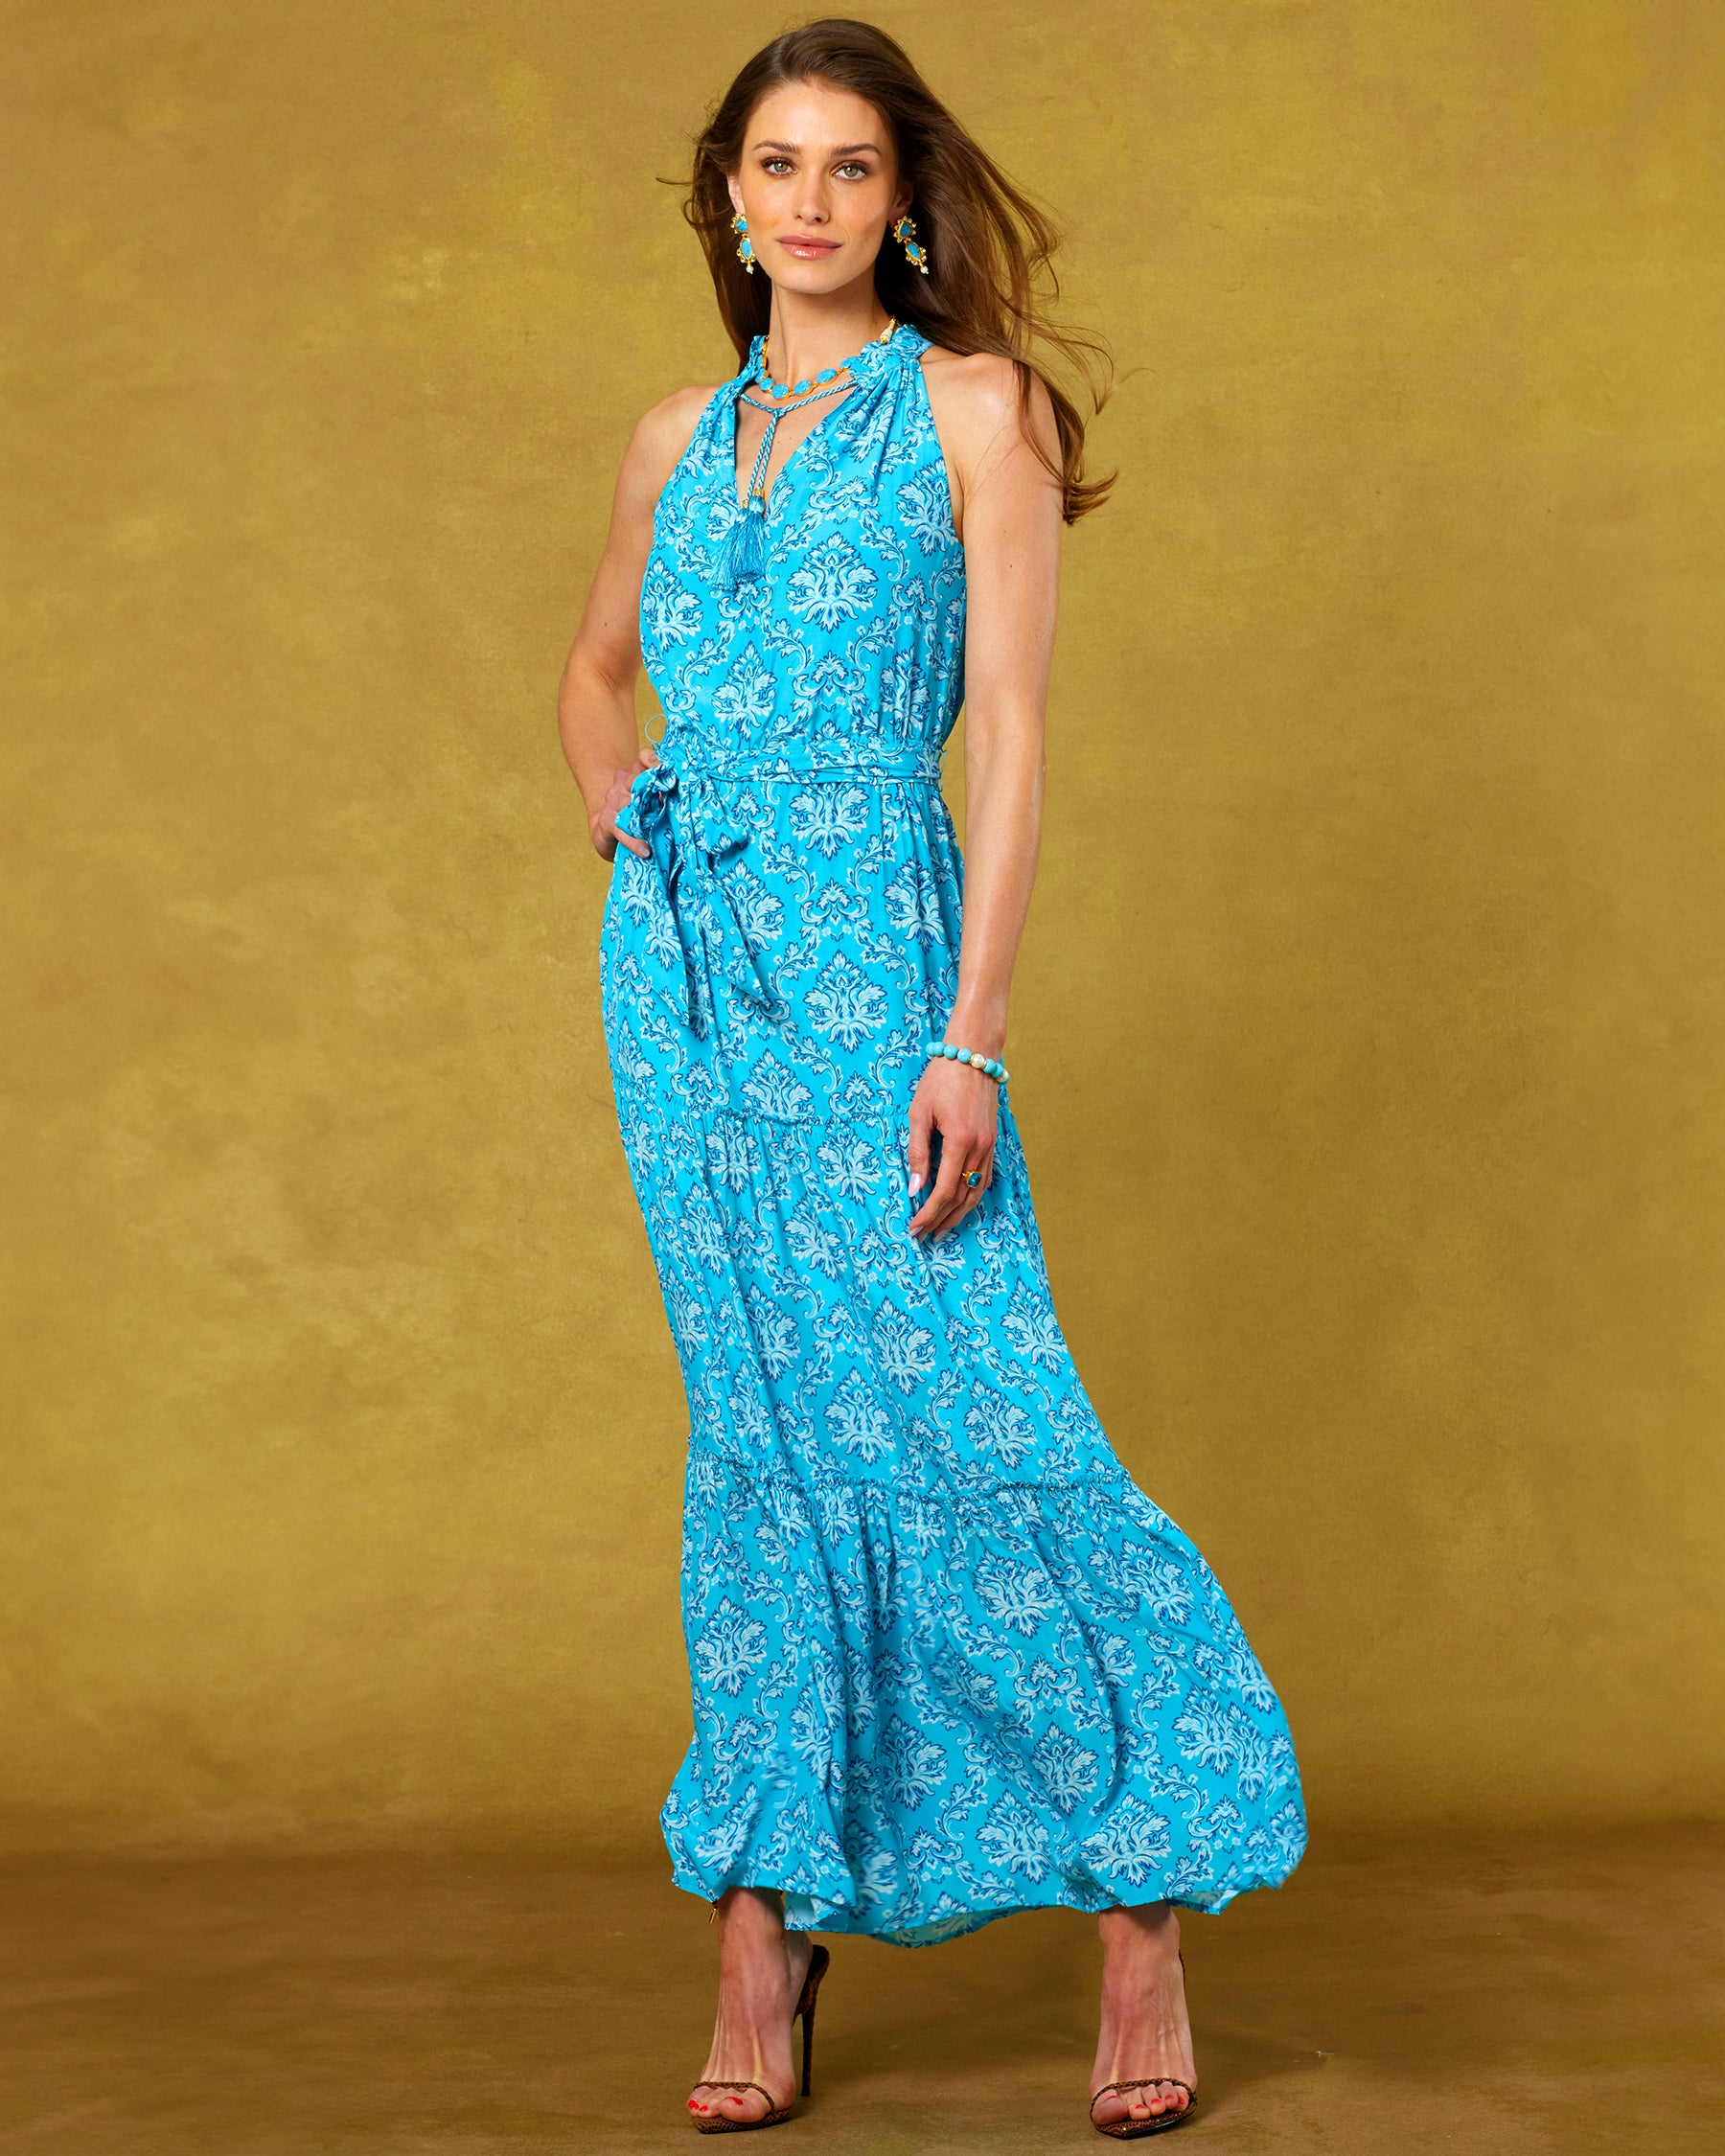 Bailey Halterneck Maxi Dress in Turquoise Baroque Florals front view with wind blowing the skirt